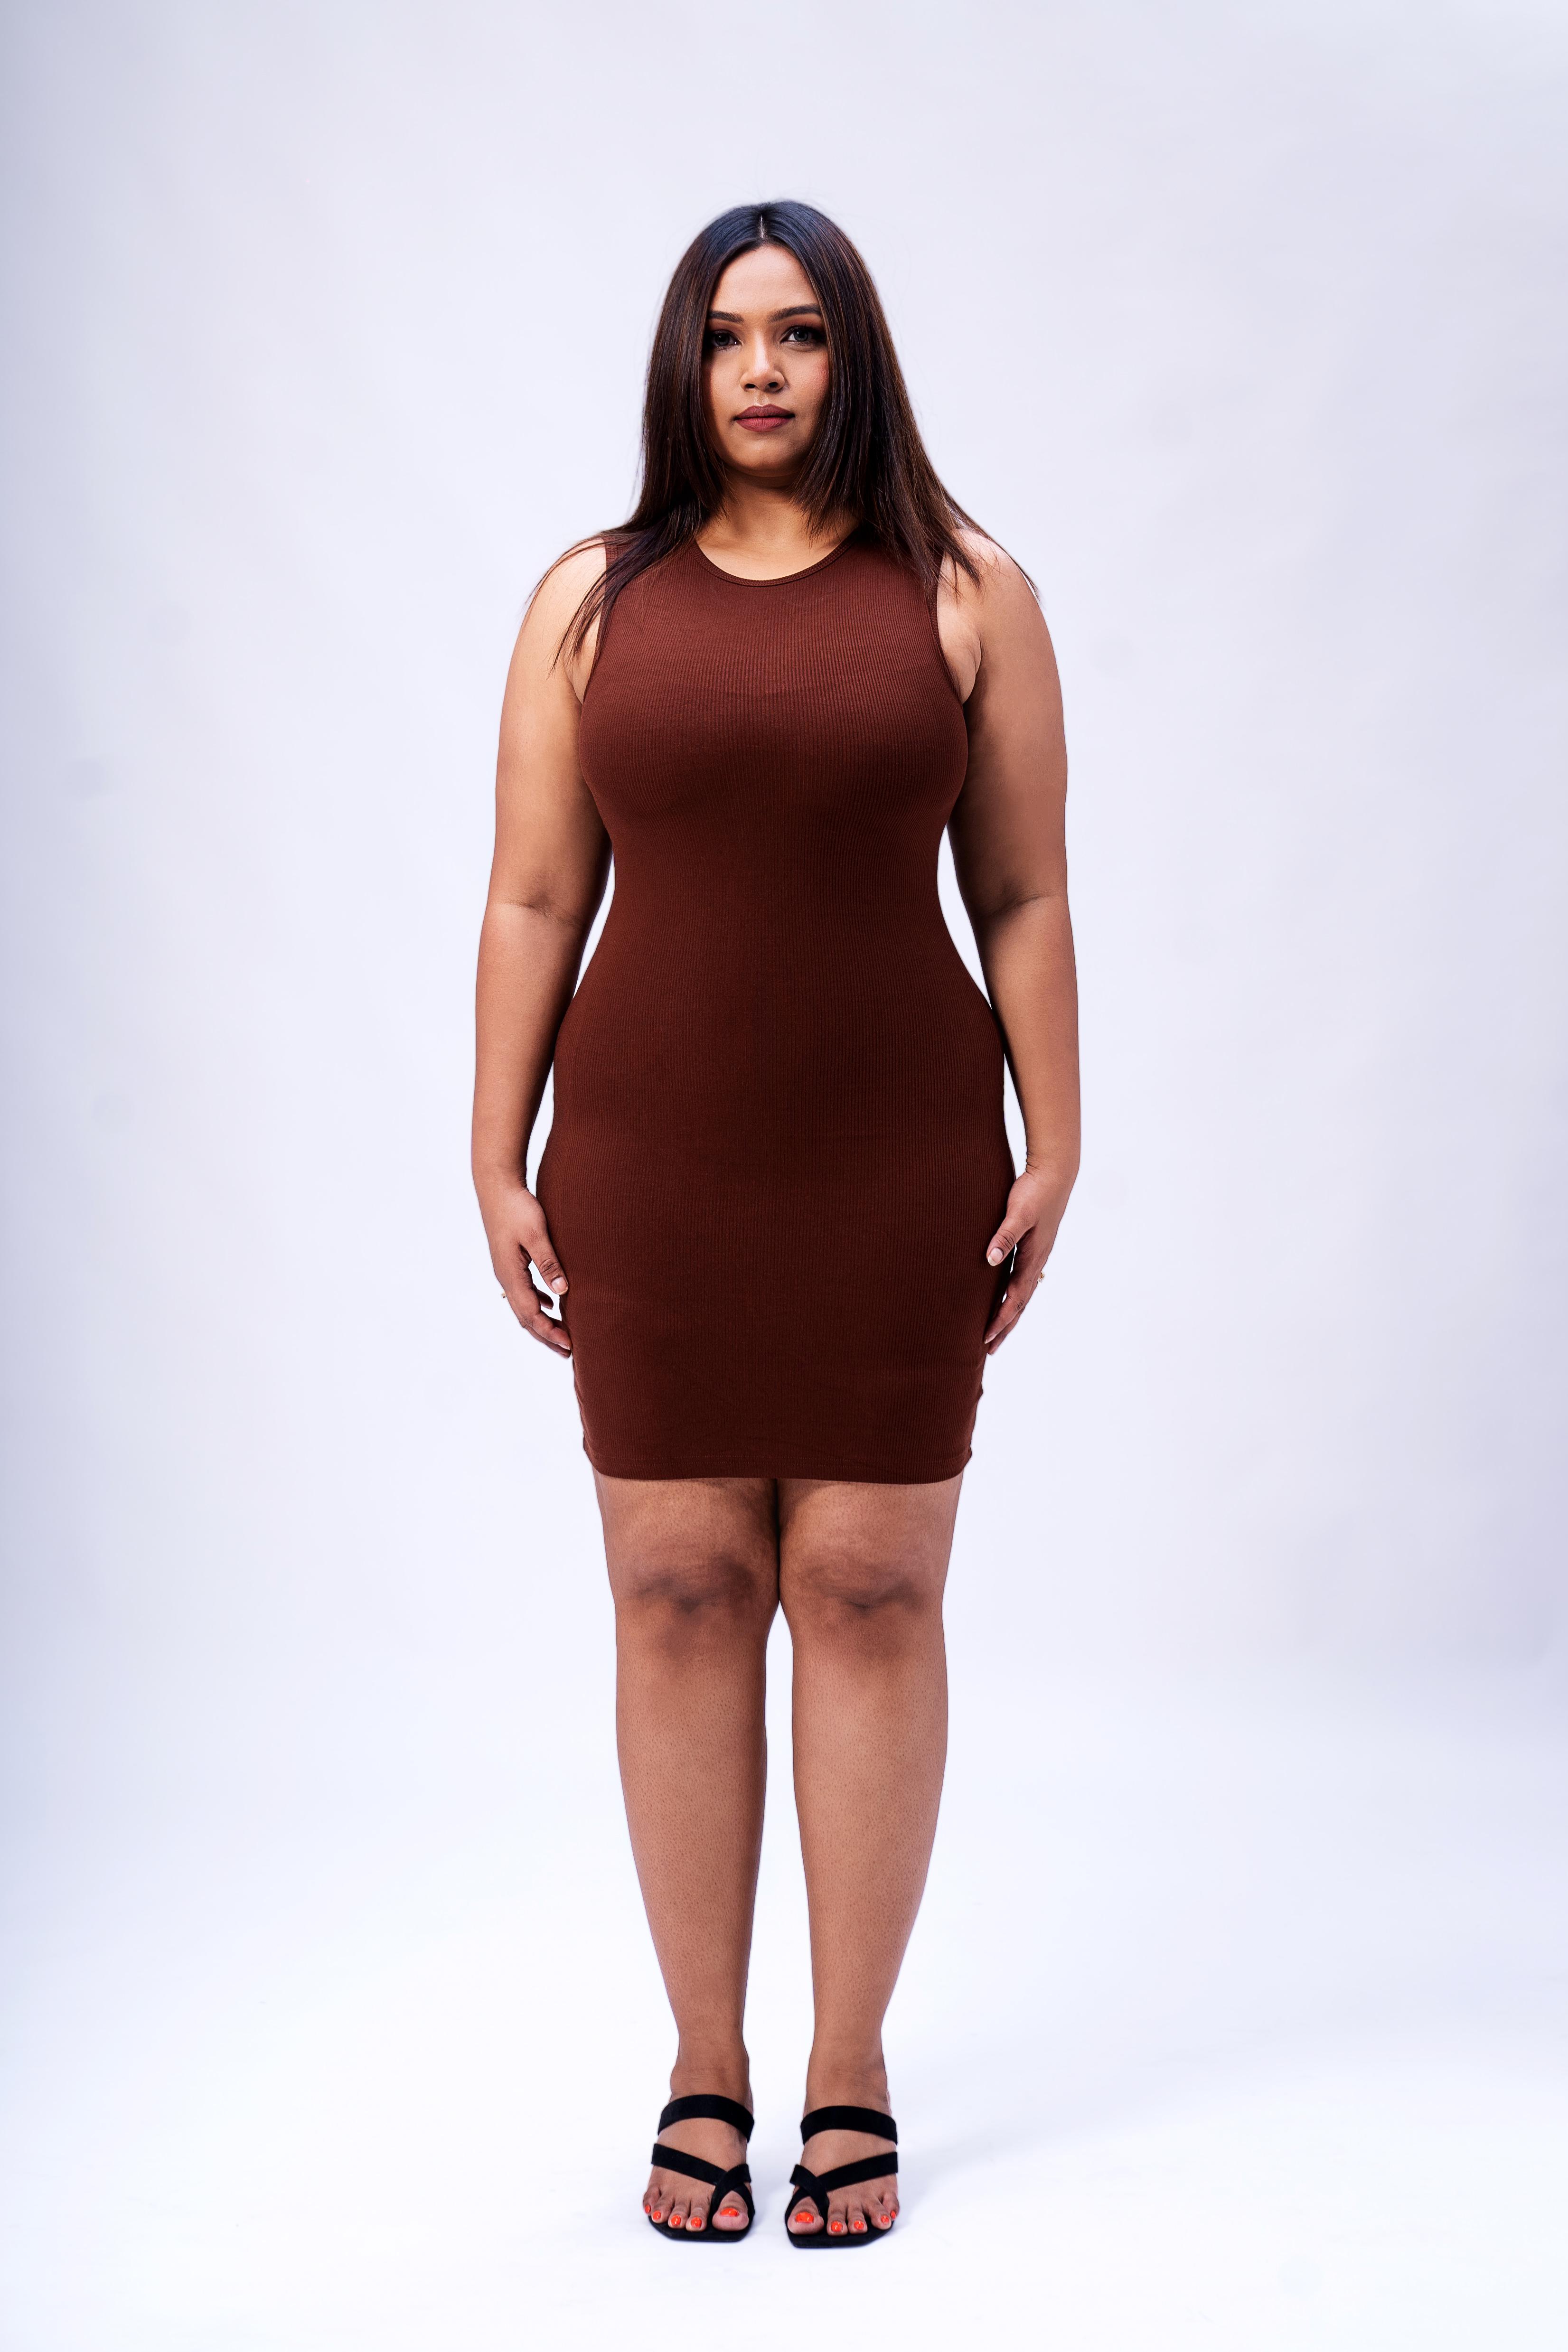 Built In Bra and Shapewear Brown Close Neck Short Dress